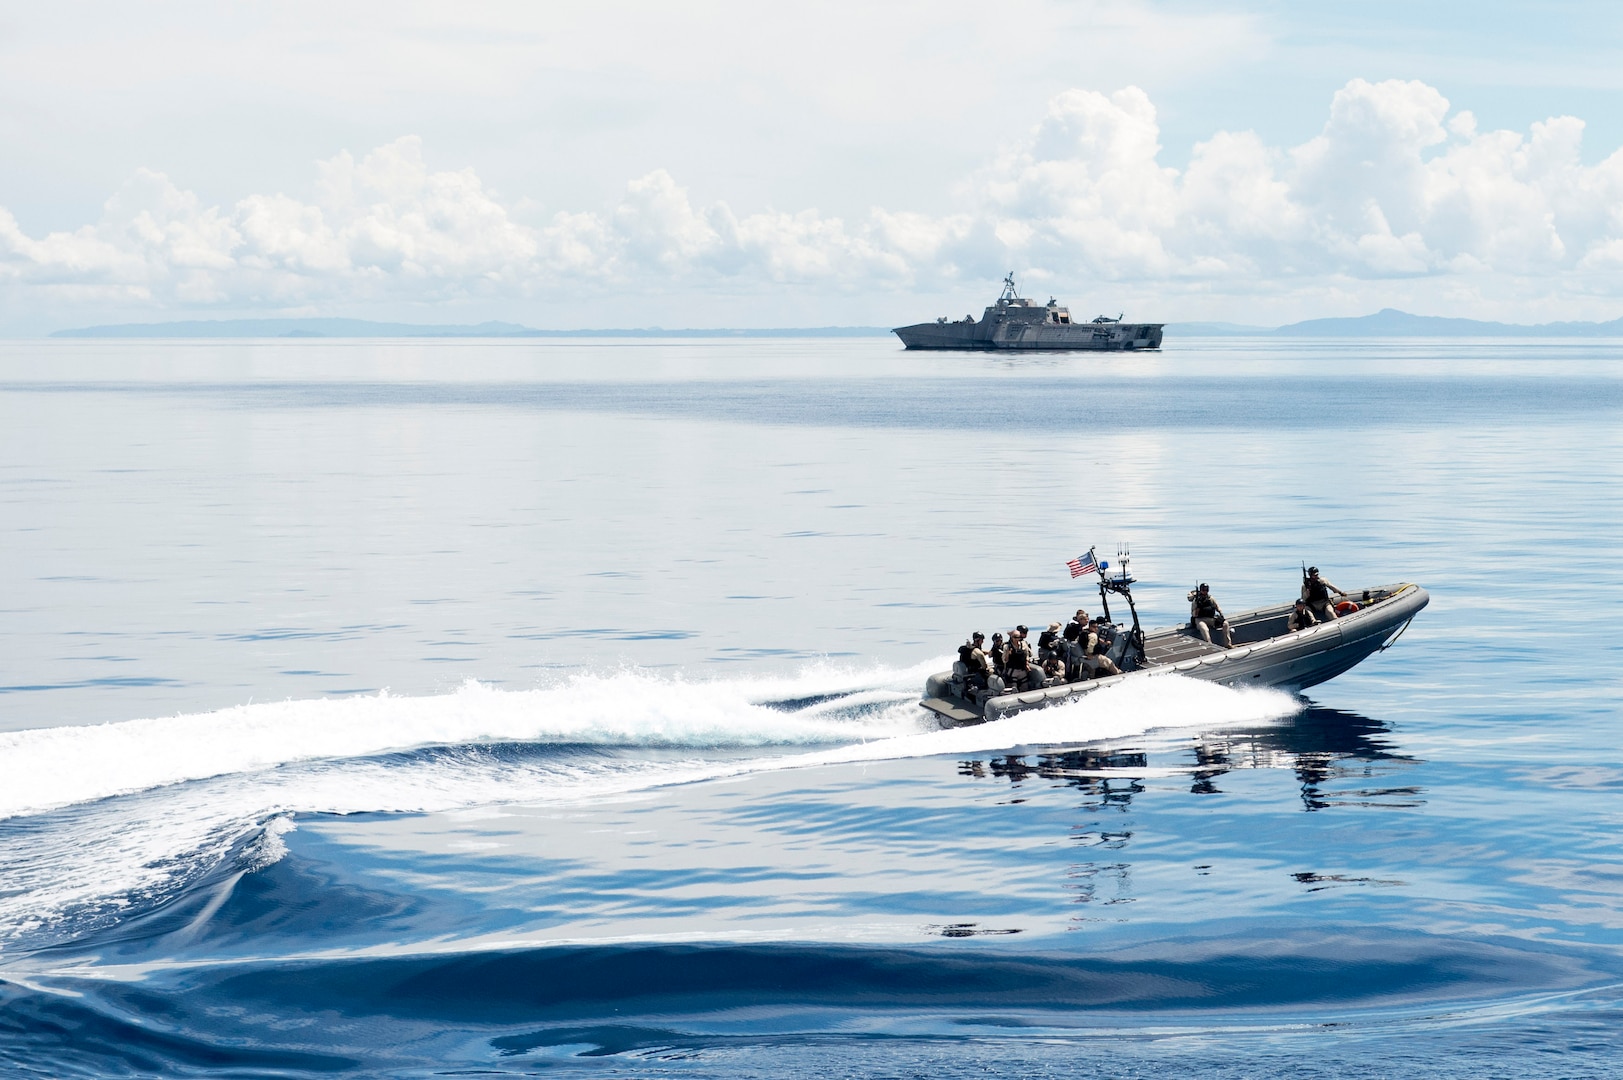 170623-N-PD309-184 BOHOL SEA (June 23, 2017) Members of the visit, board, search and seizure (VBSS) team aboard littoral combat ship USS Coronado (LCS 4) prepare to board Philippine Navy ship BRP BATAK (LC 299) during a VBSS exercise for Maritime Training Activity (MTA) Sama Sama 2017. MTA Sama Sama is a bilateral maritime exercise between U.S. and Philippine naval forces and is designed to strengthen cooperation and interoperability between the nations' armed forces.  (U.S. Navy photo by Mass Communication Specialist 3rd Class Deven Leigh Ellis/Released)